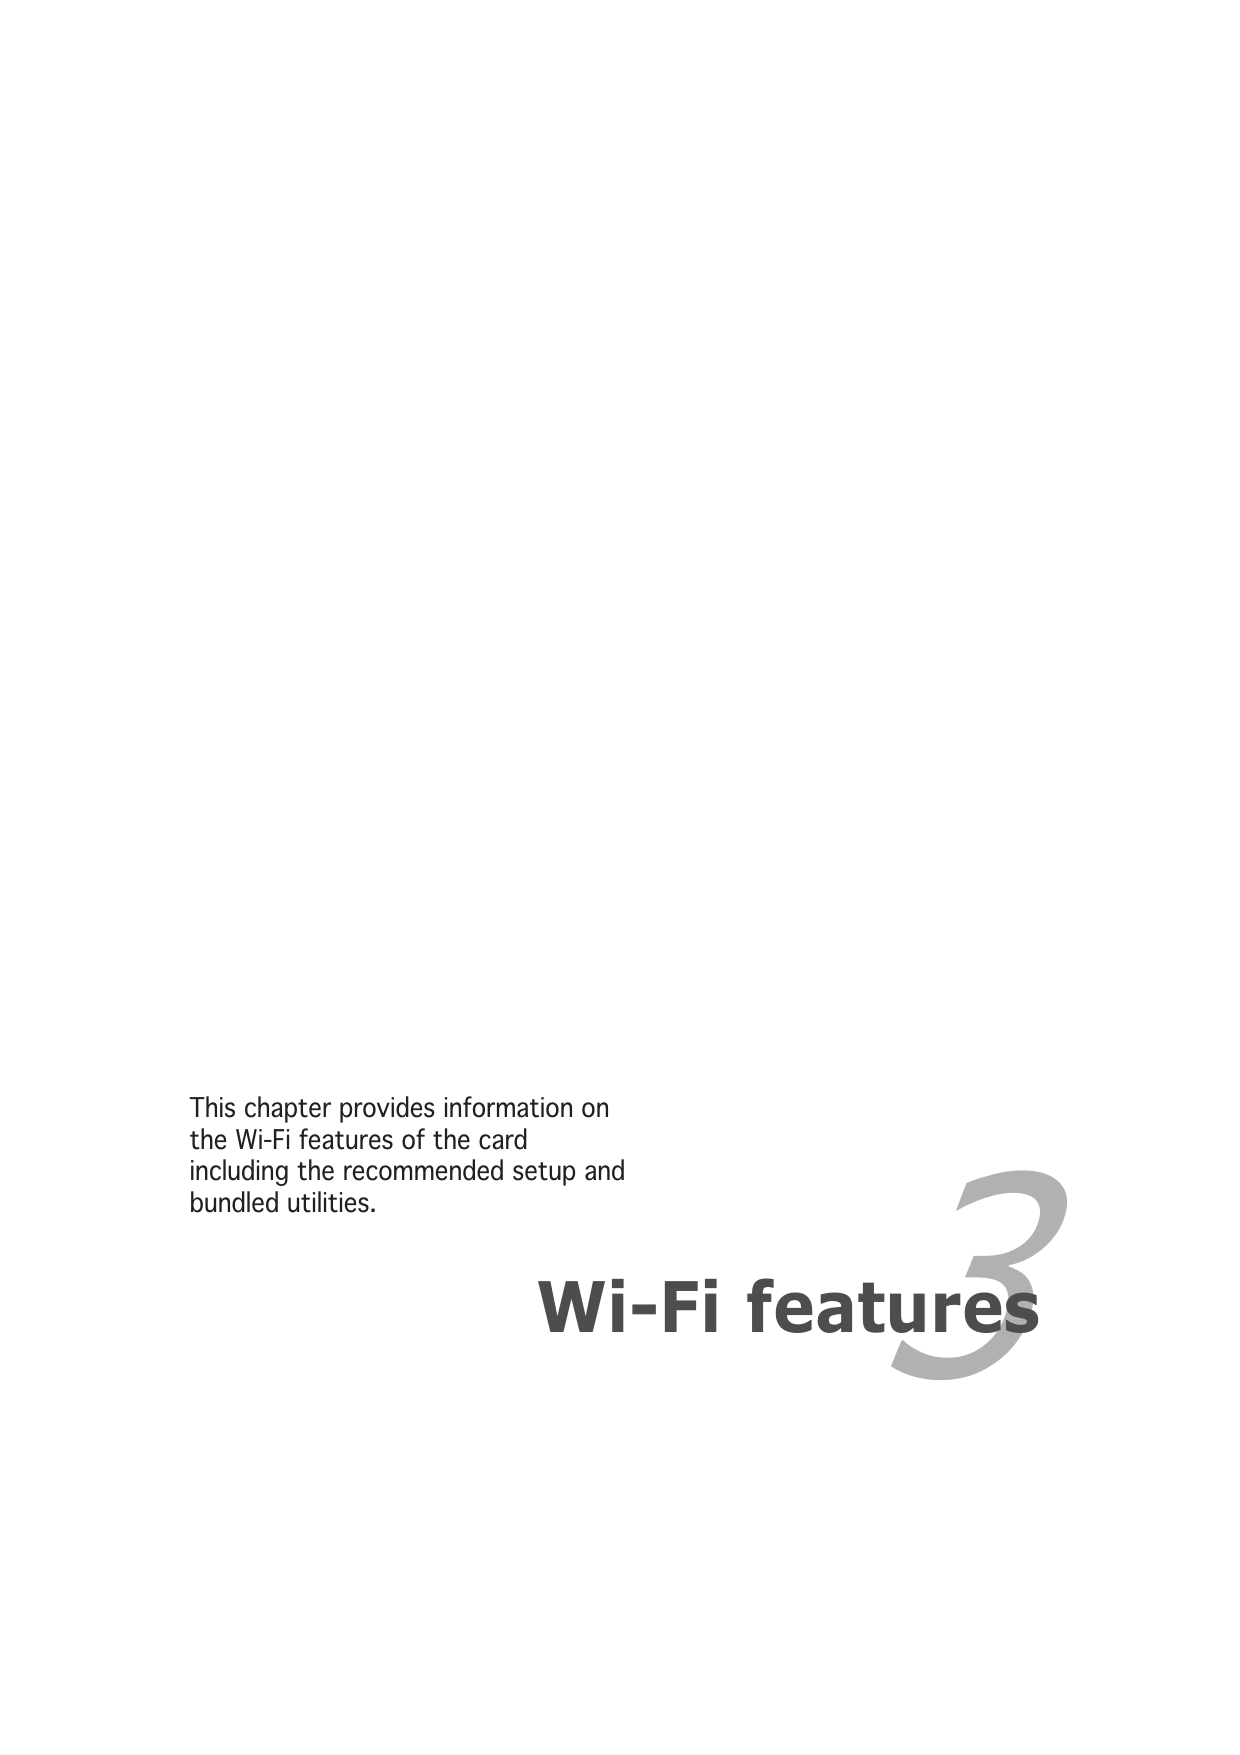 3Wi-Fi featuresThis chapter provides information onthe Wi-Fi features of the cardincluding the recommended setup andbundled utilities.